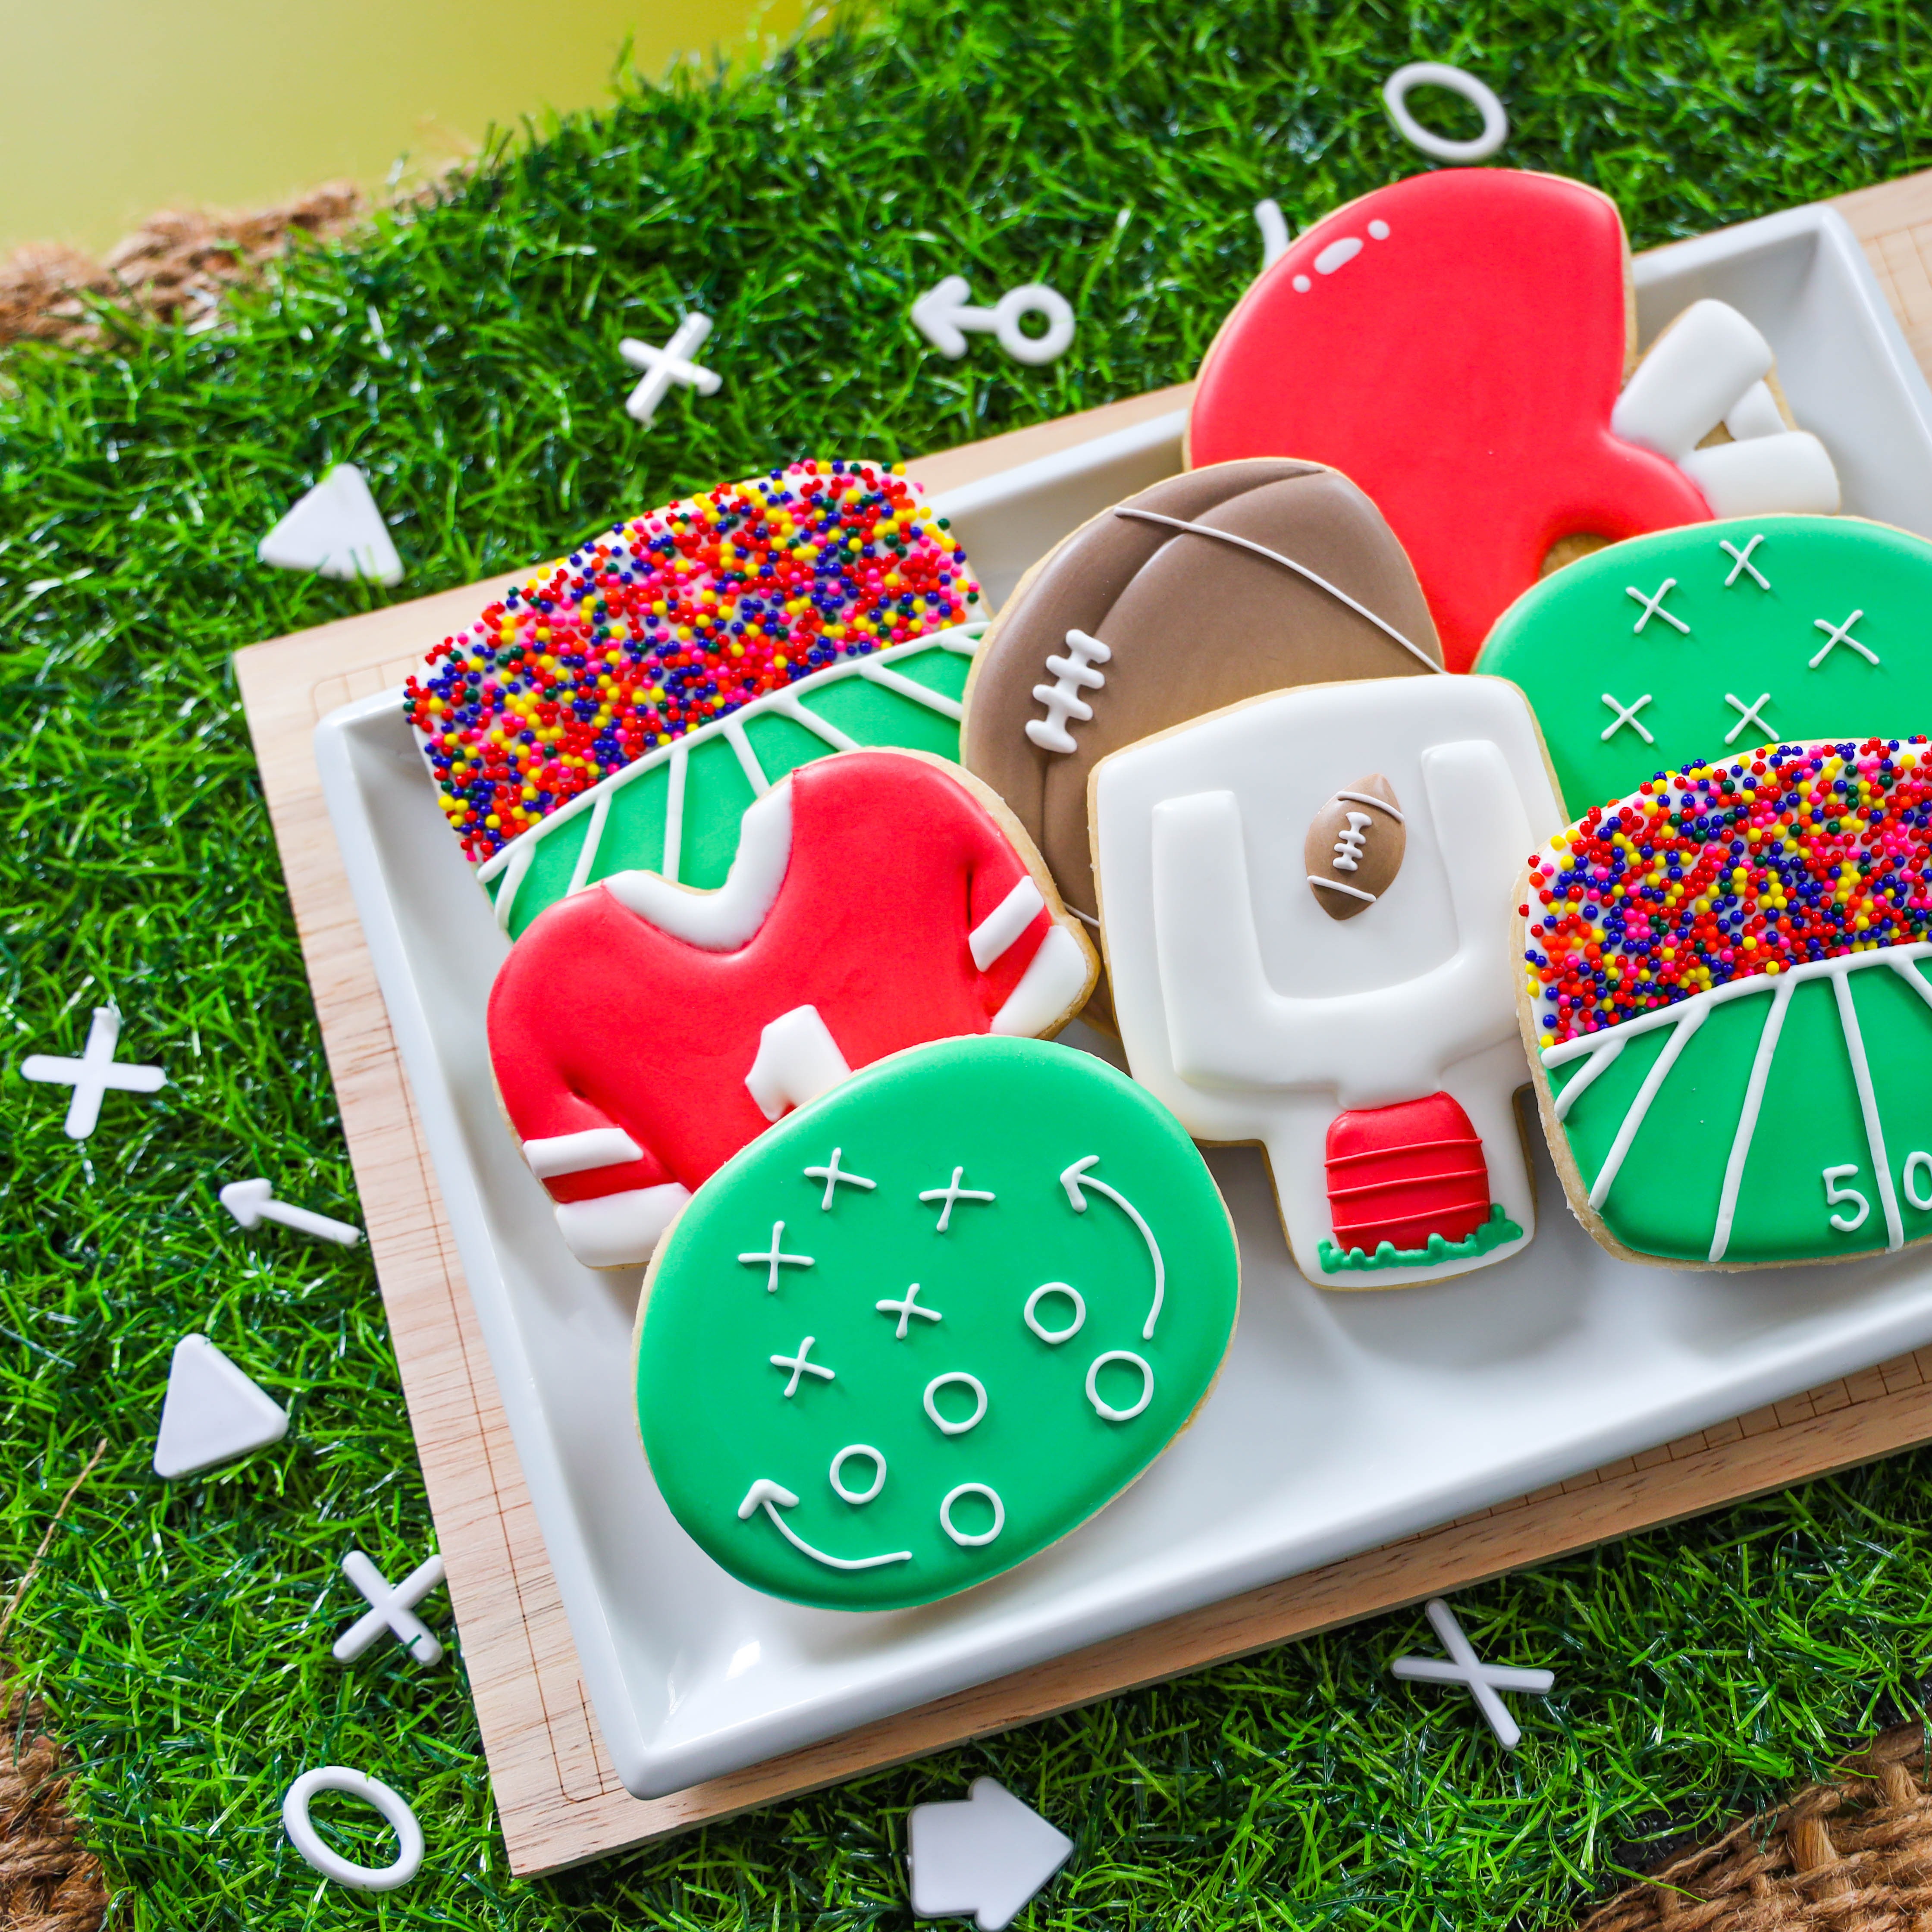 02/10/24 - 3pm Football Frosting Sugar Cookie Decorating Class